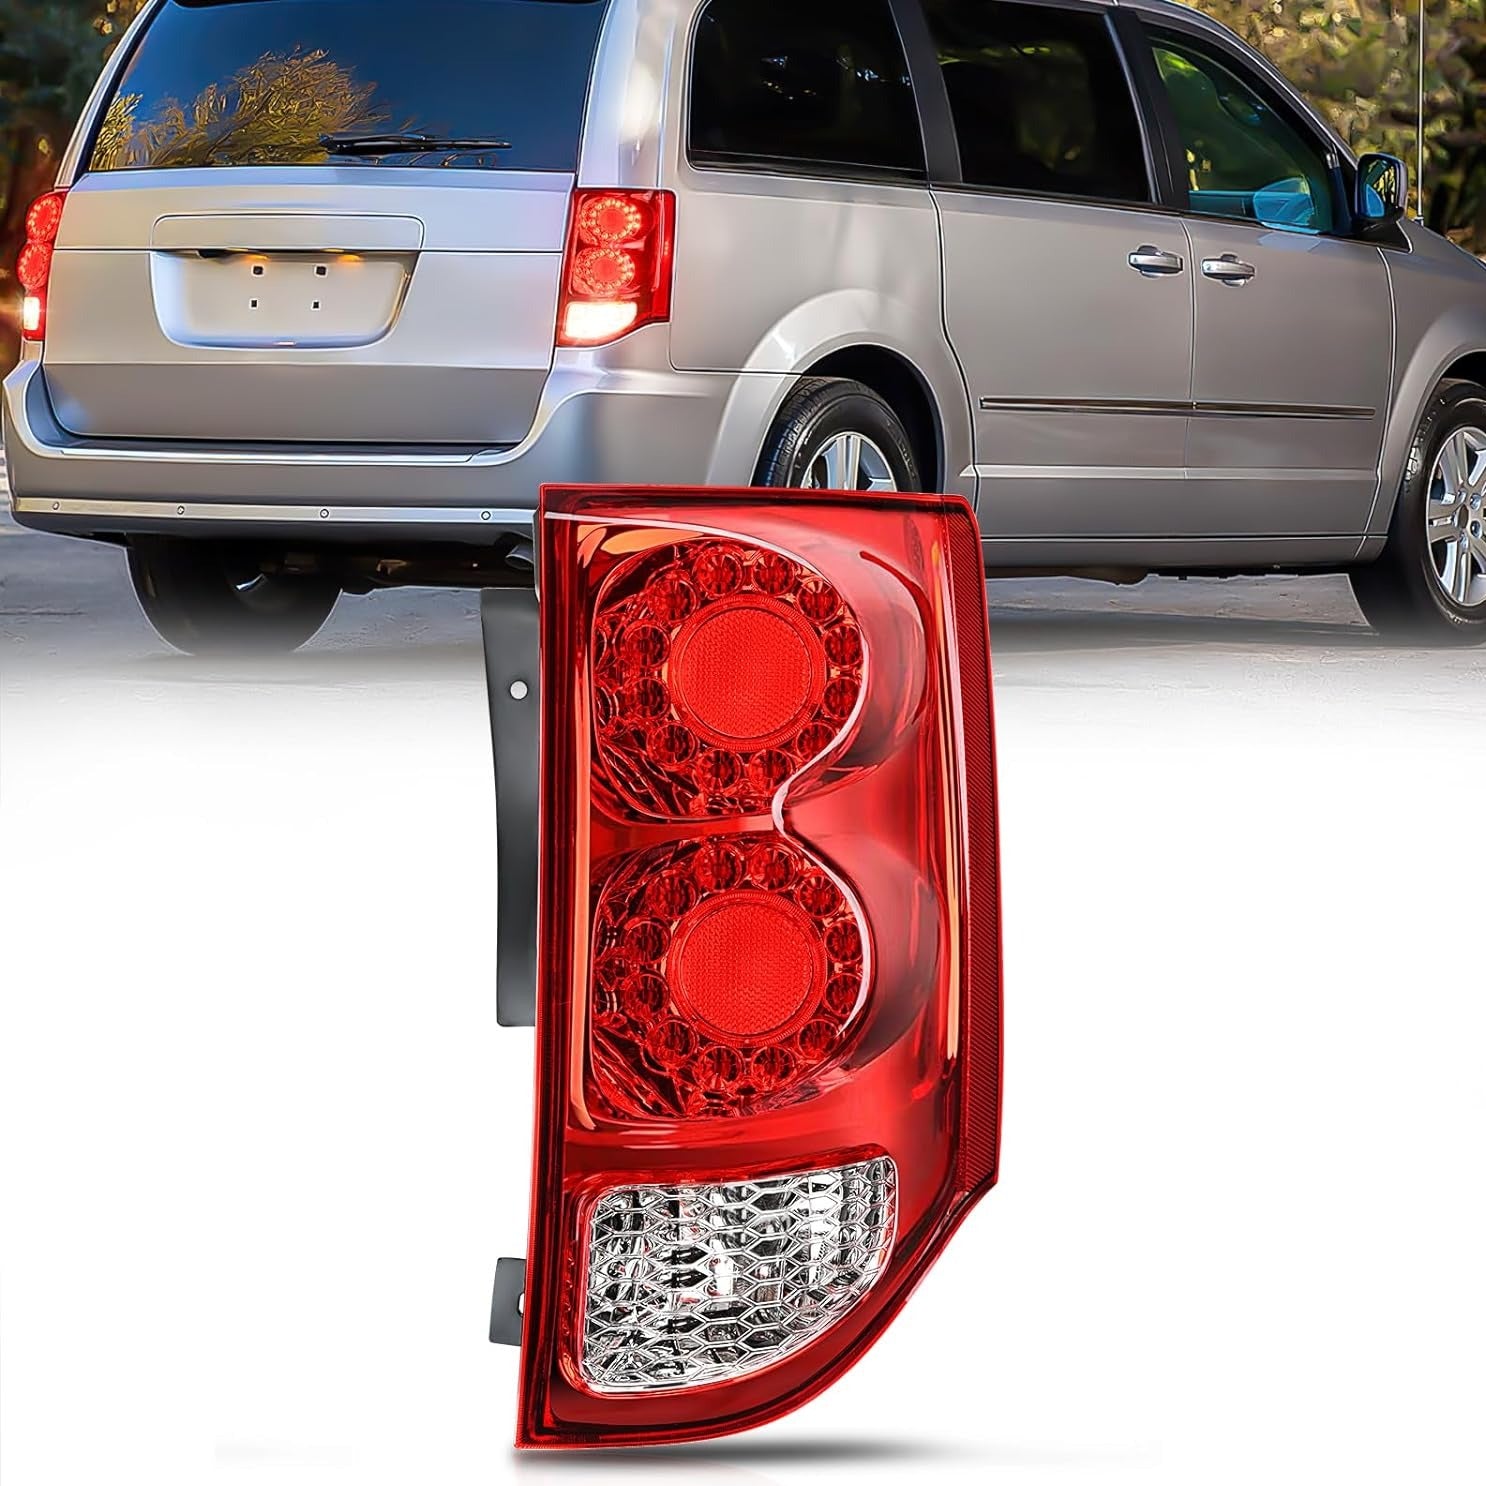 2011-2020 Dodge Grand Caravan Taillight Assembly Rear Lamp Replacement OE Style Passenger Side Nilight